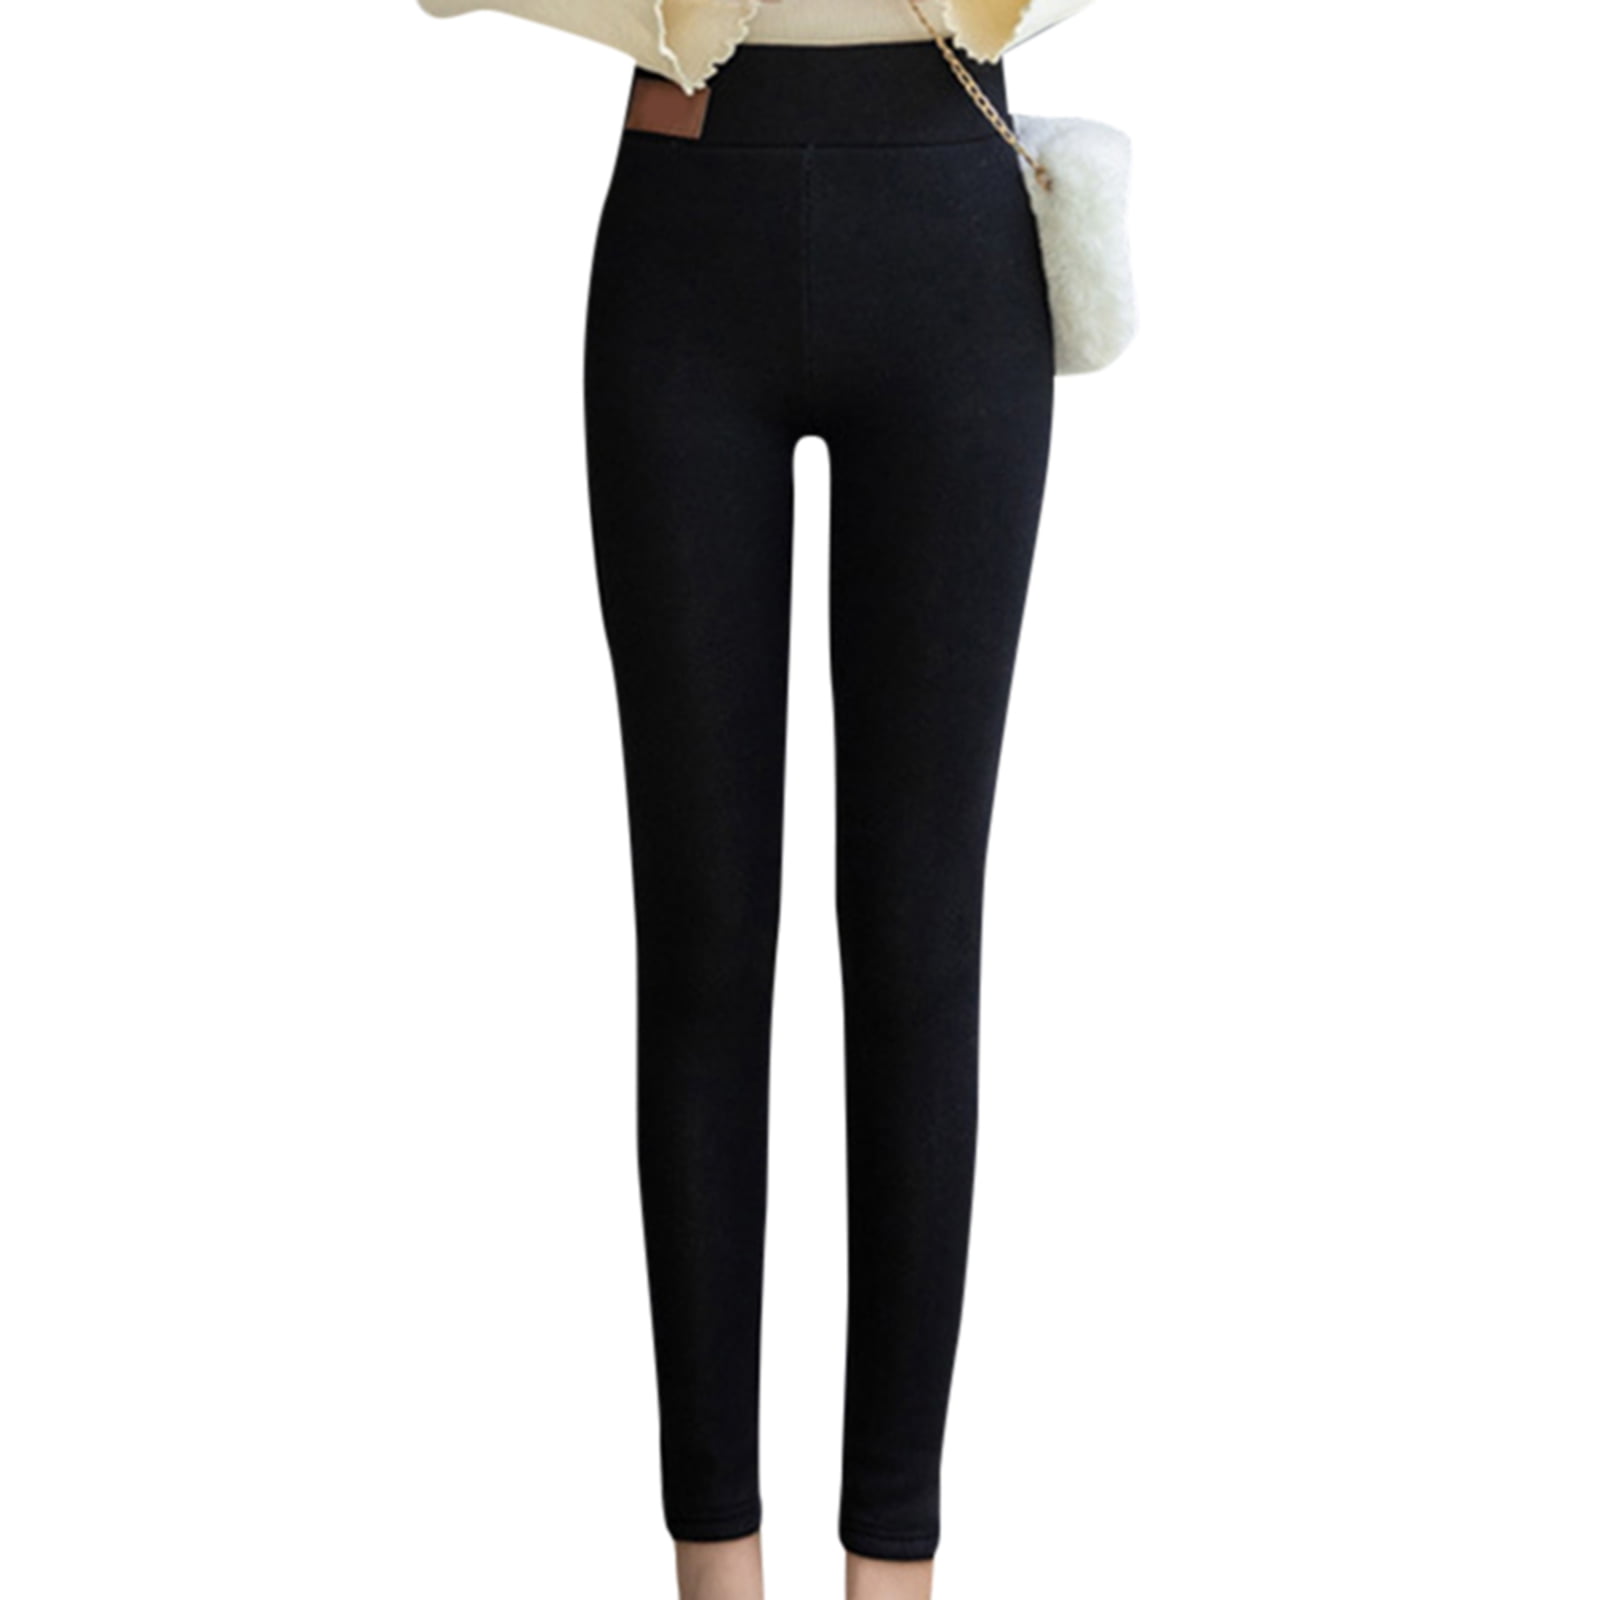 Floepx Super Thick Cashmere Wool Leggings Windproof Nigeria